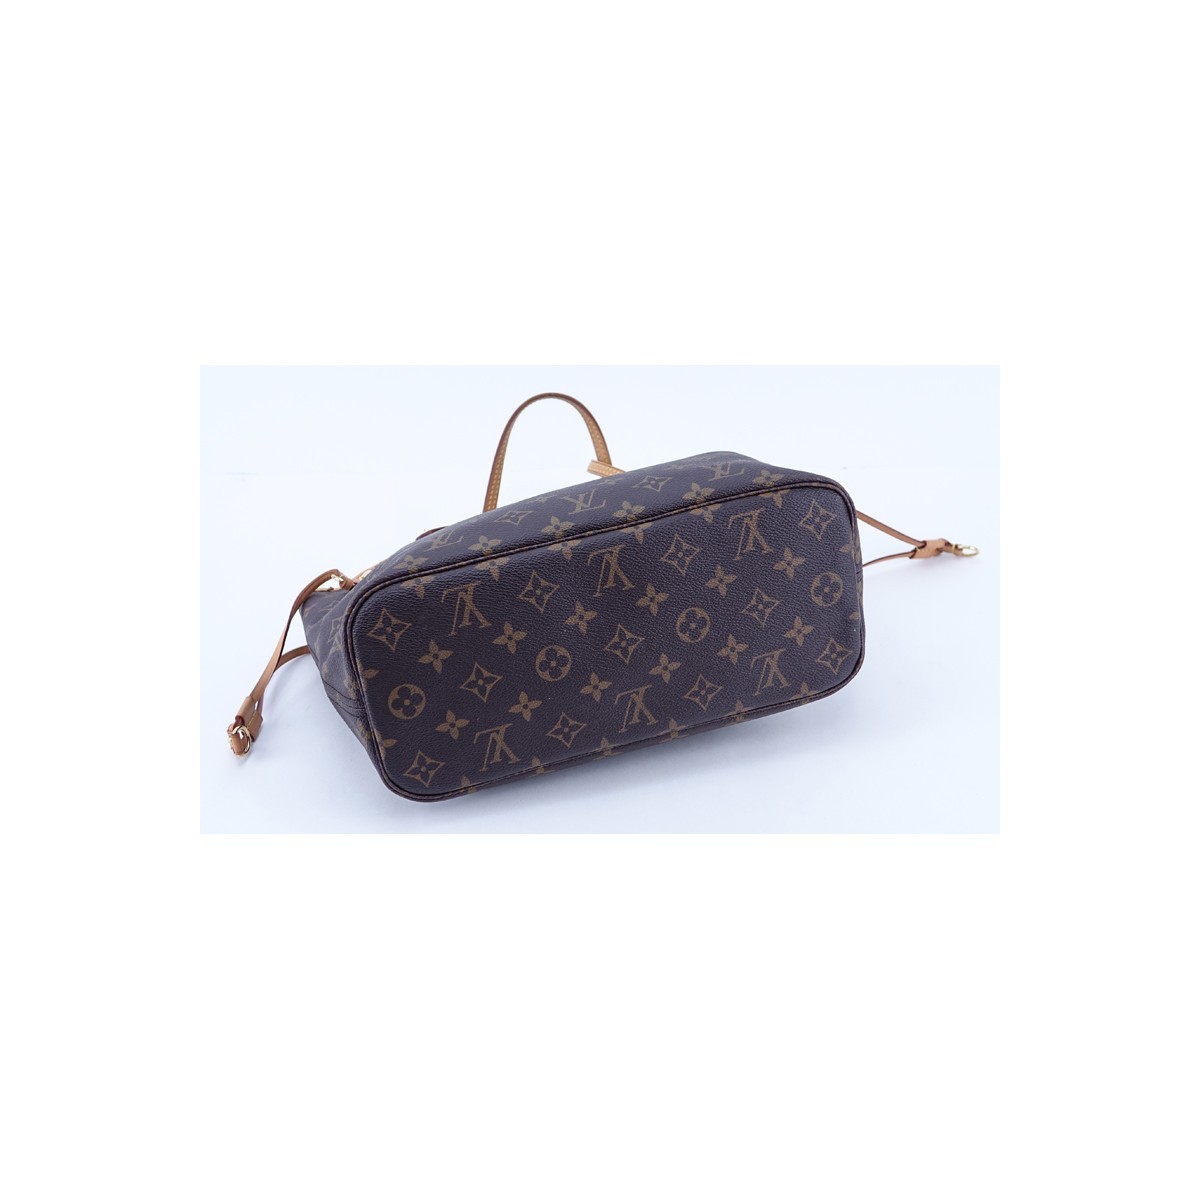 Louis Vuitton Brown Monogram Coated Canvas And Leather Neverfull PM Handbag. Golden brass hardware, signature canvas interior with zippered pocket, vachetta straps.